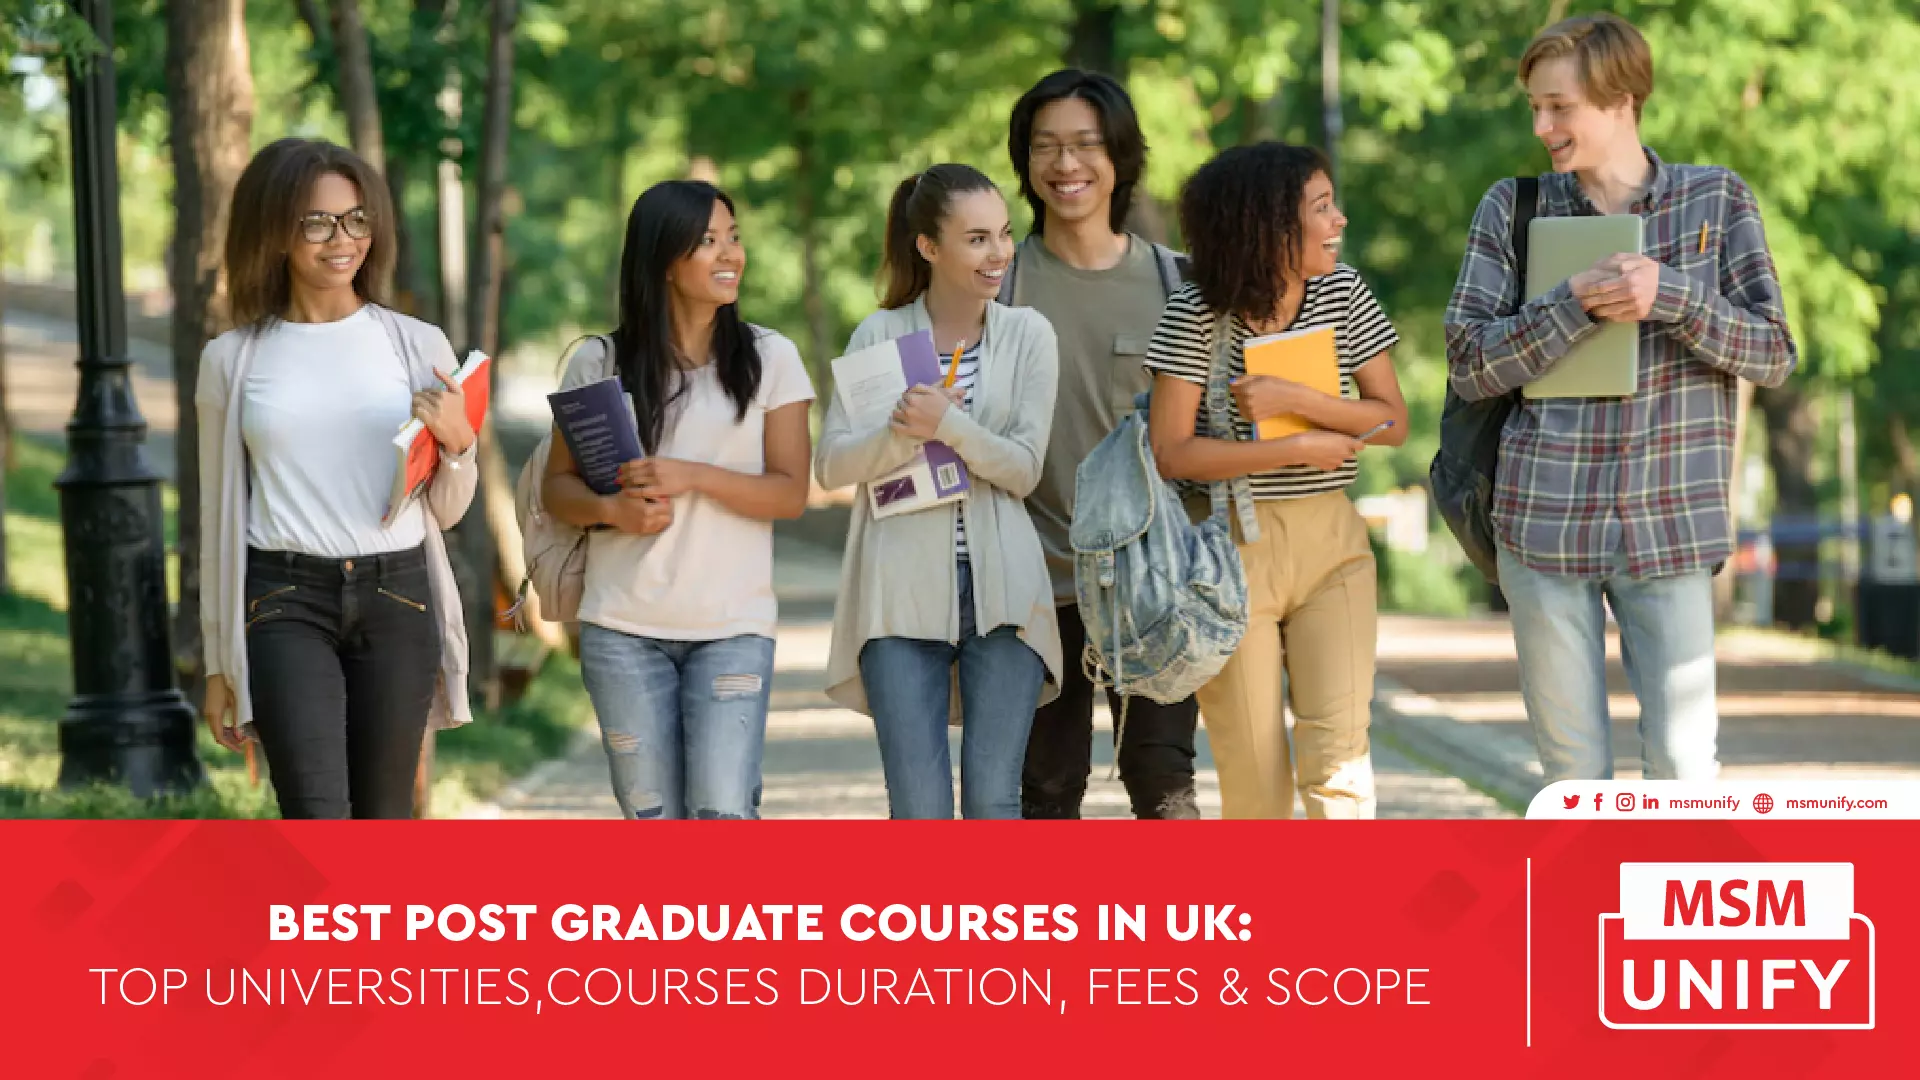 122222 MSM Unify Best Post Graduate Courses in UK Top Universities Course Duration Fees Scope 01